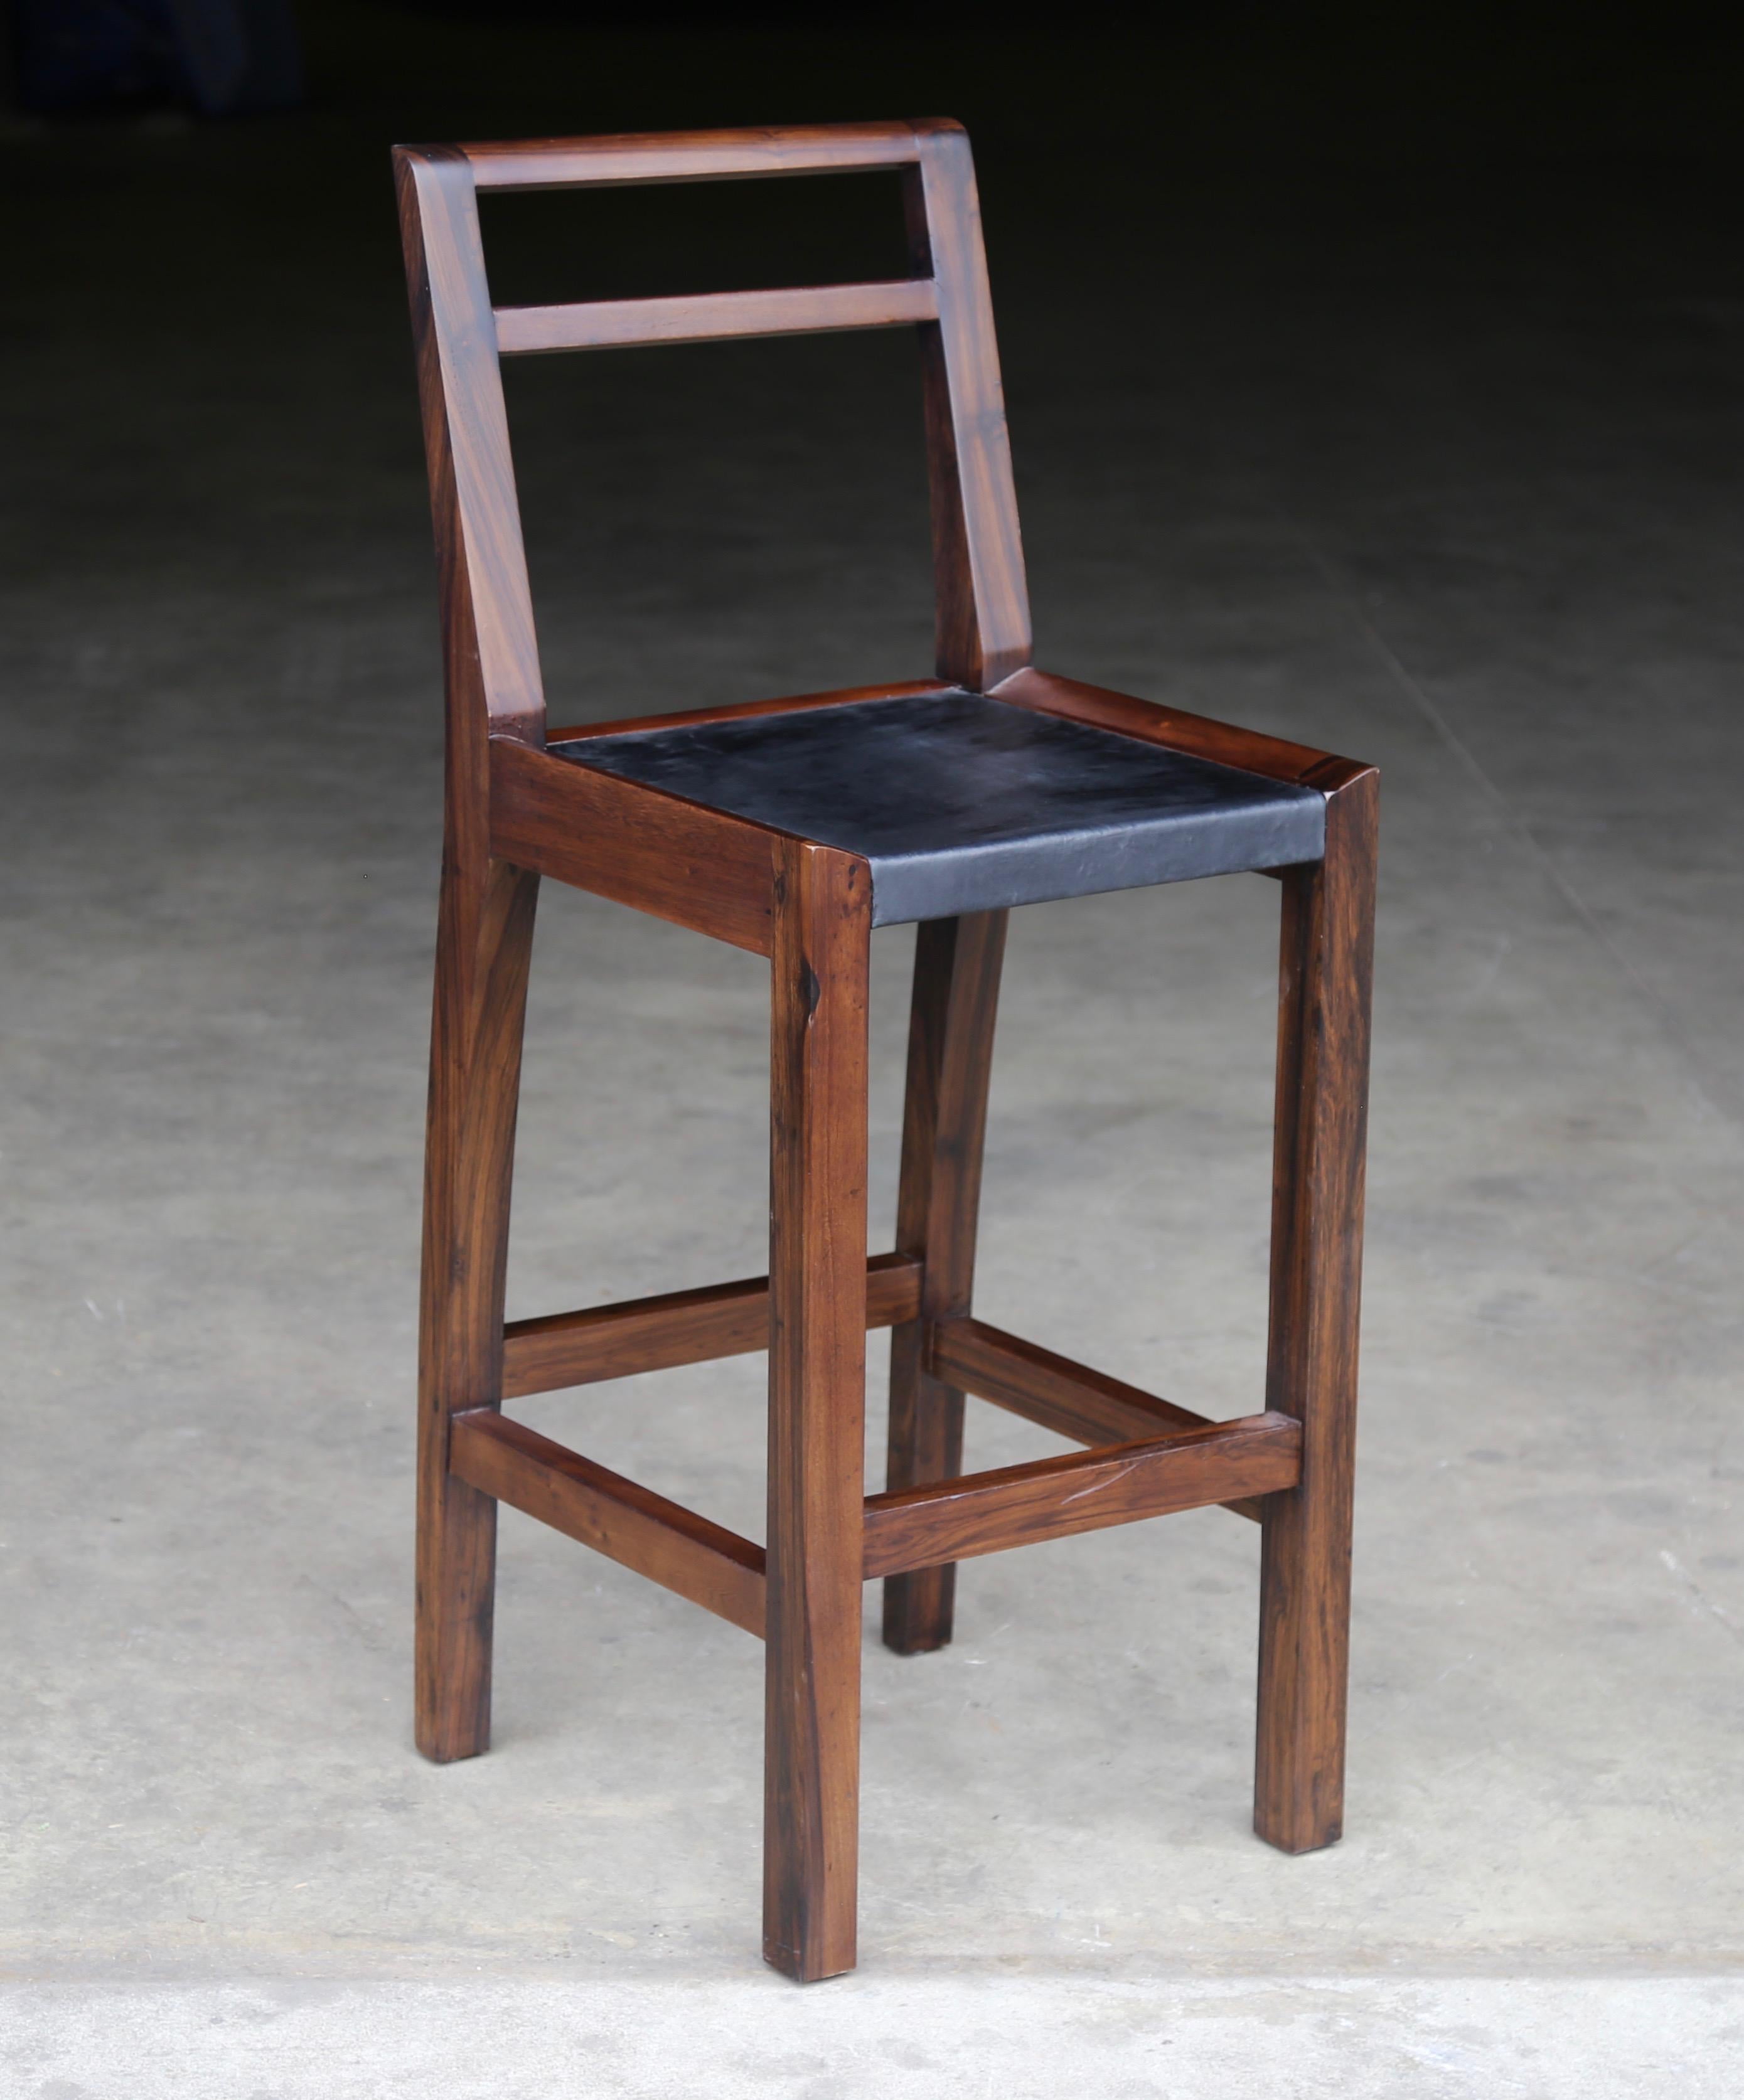 Contemporary Orianna Stool in Argentine Rosewood and Wrapped Leather from Costantini